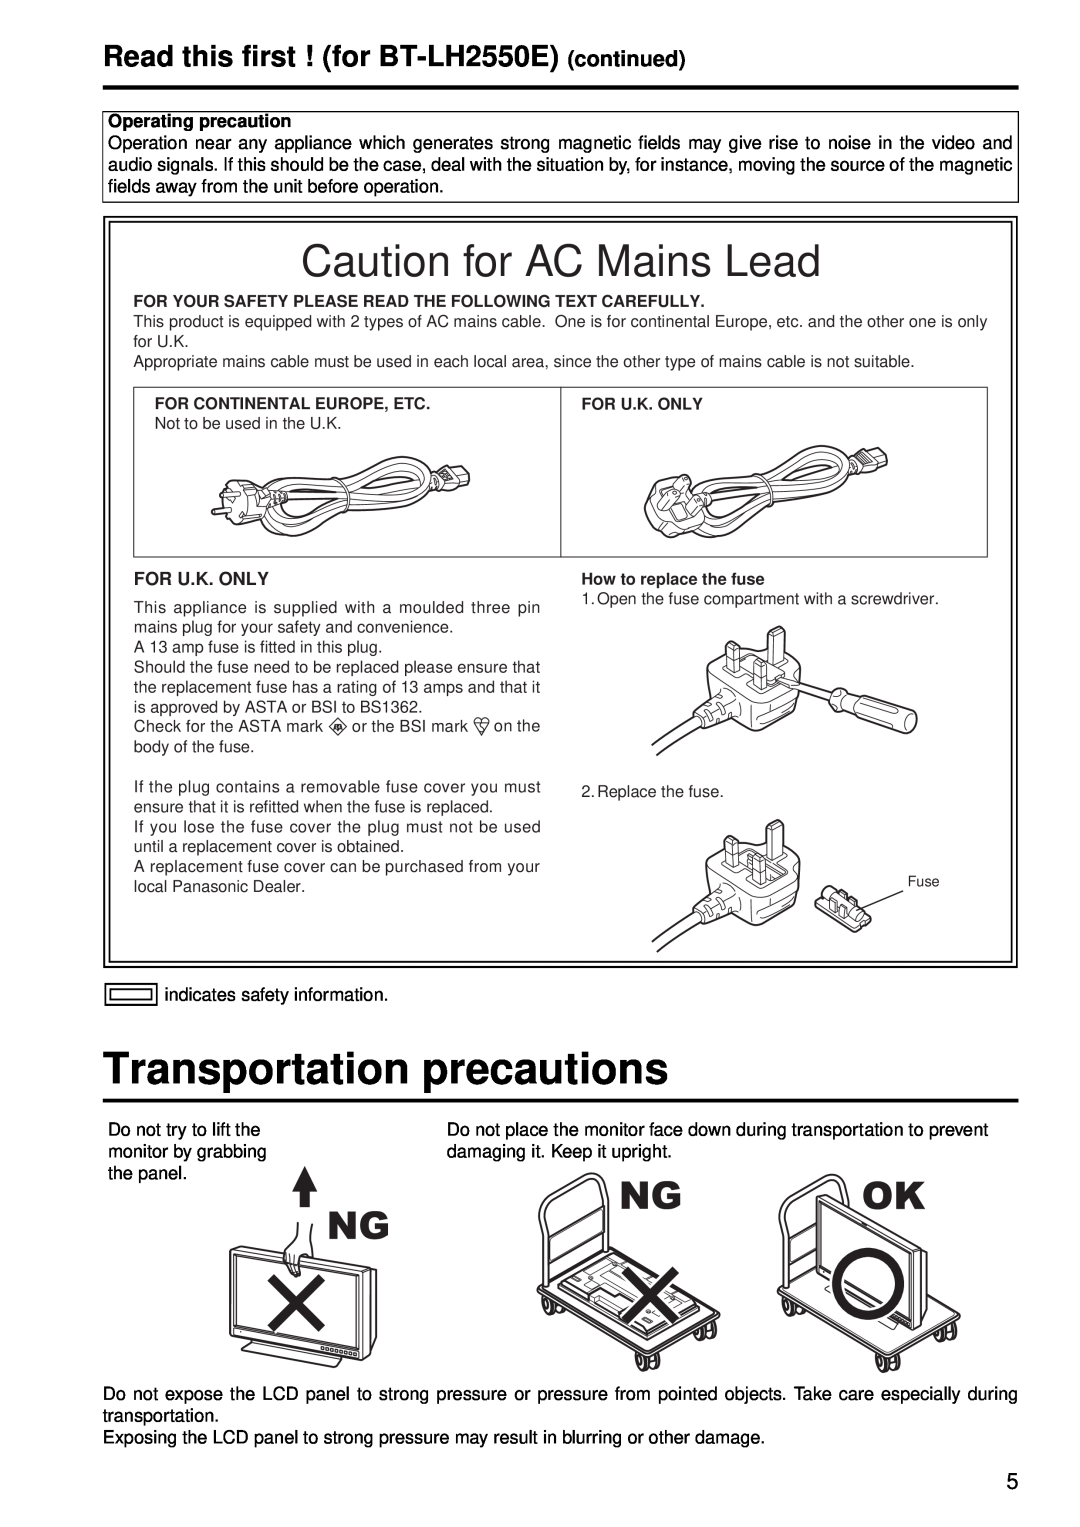 Panasonic BT-LH2550P Transportation precautions, Read this first ! for BT-LH2550E continued, Caution for AC Mains Lead 